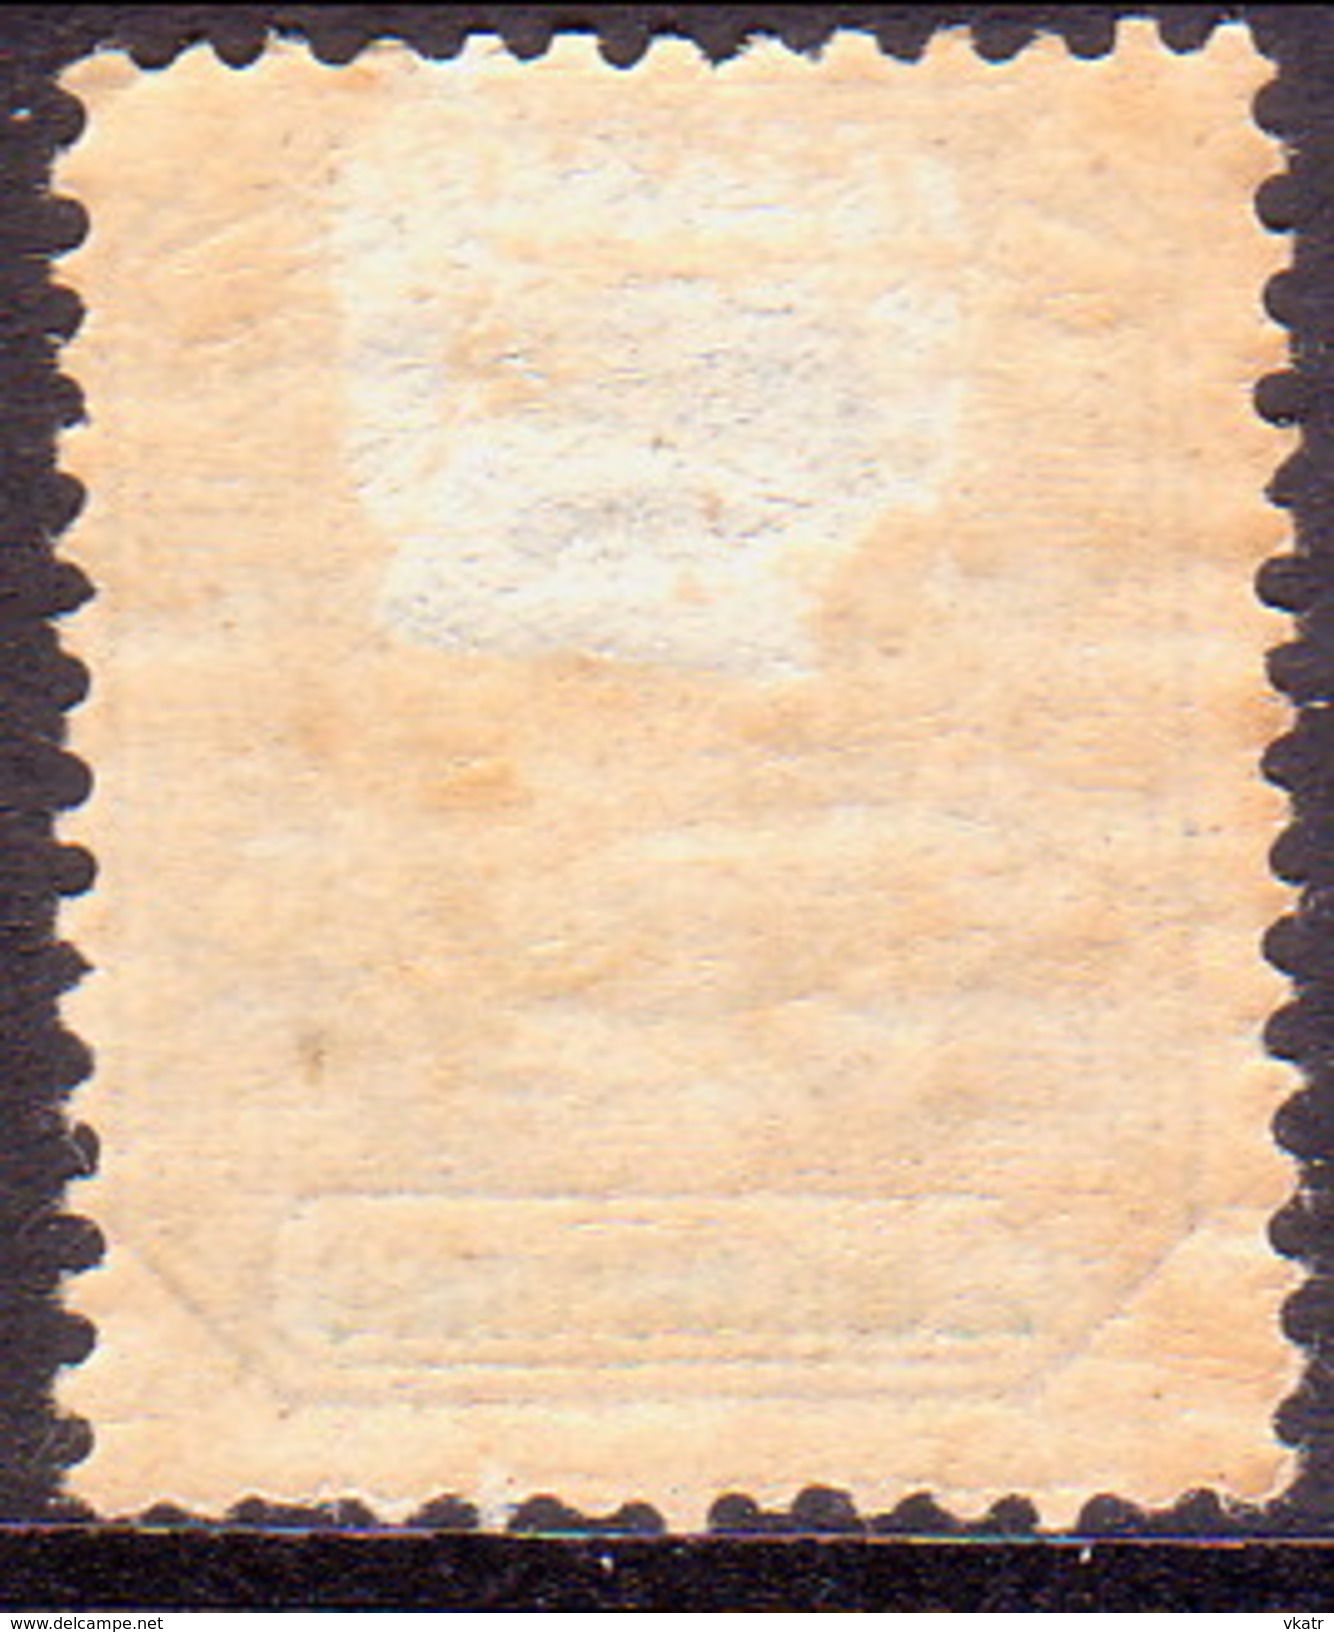 SOUTH AFRICA TRANSVAAL 1896 SG #224 2sh6d MH Thin - Transvaal (1870-1909)